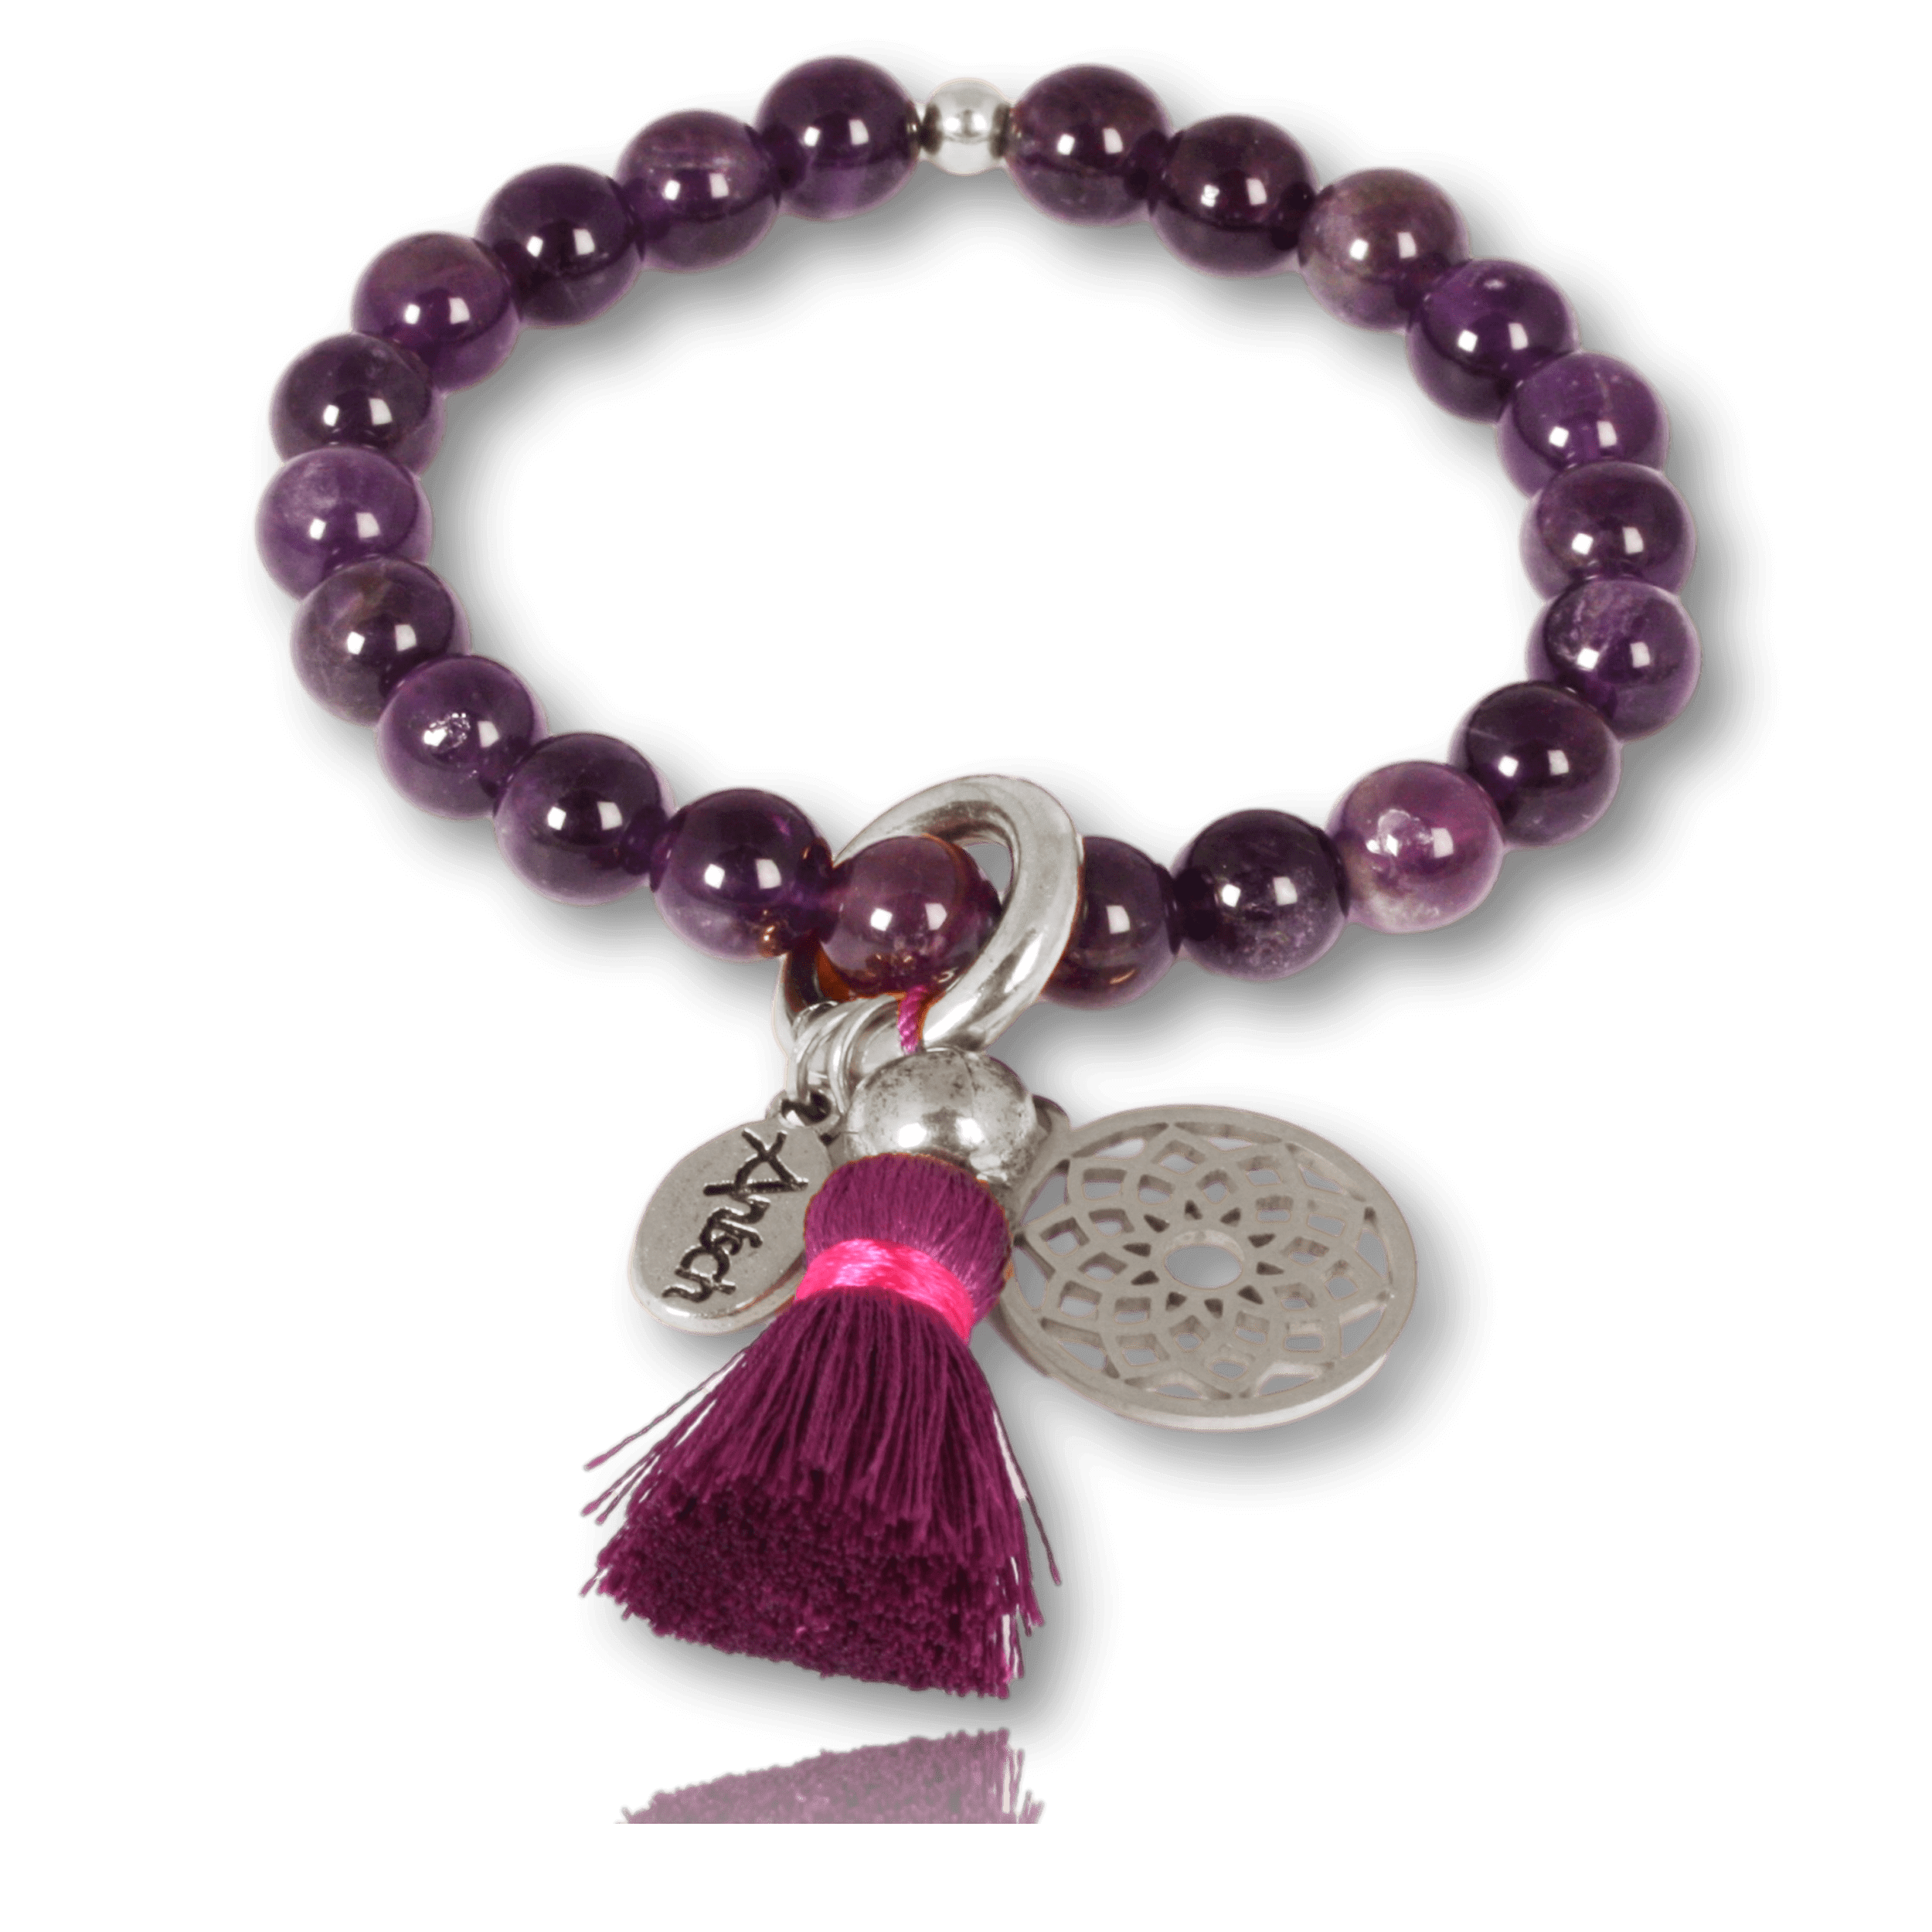 Amethyst gemstone bracelet silver-plated for your crown chakra: connection & fullness